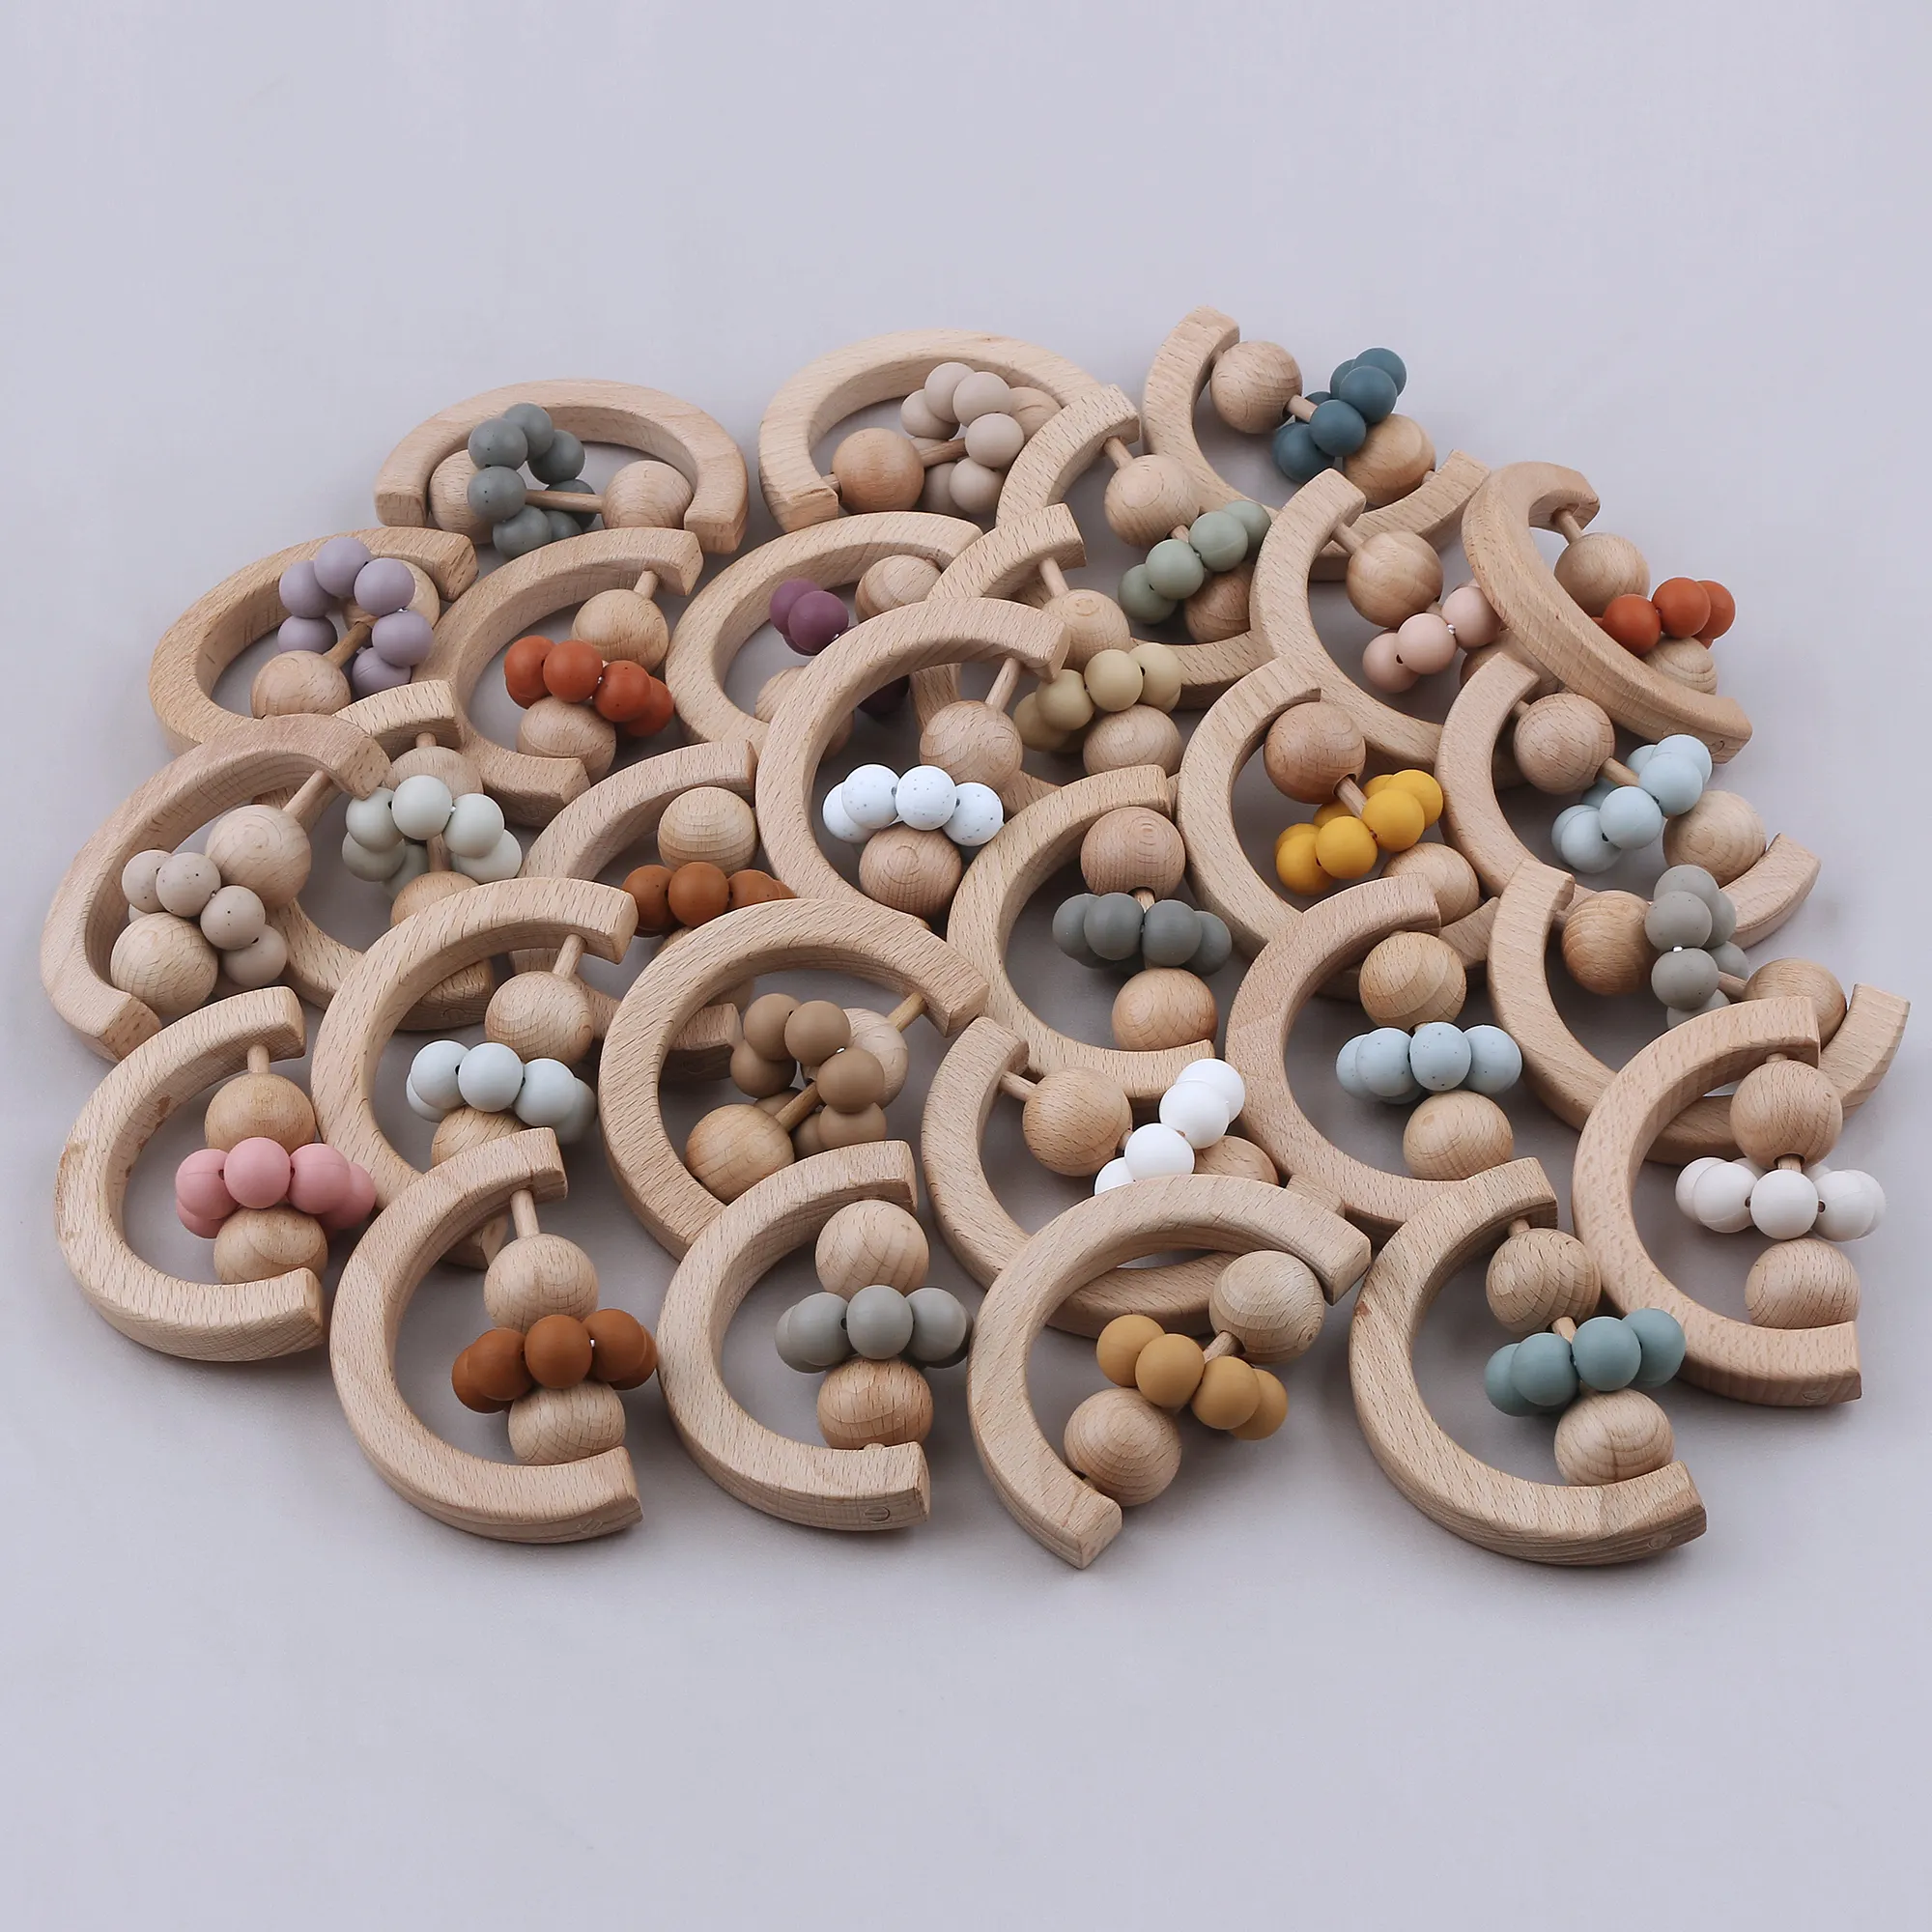 Silicone Beads Baby Teether Wooden Ring Silicone Teether Newborn Intelligence Grasping Educational Toy Baby Shower Gift